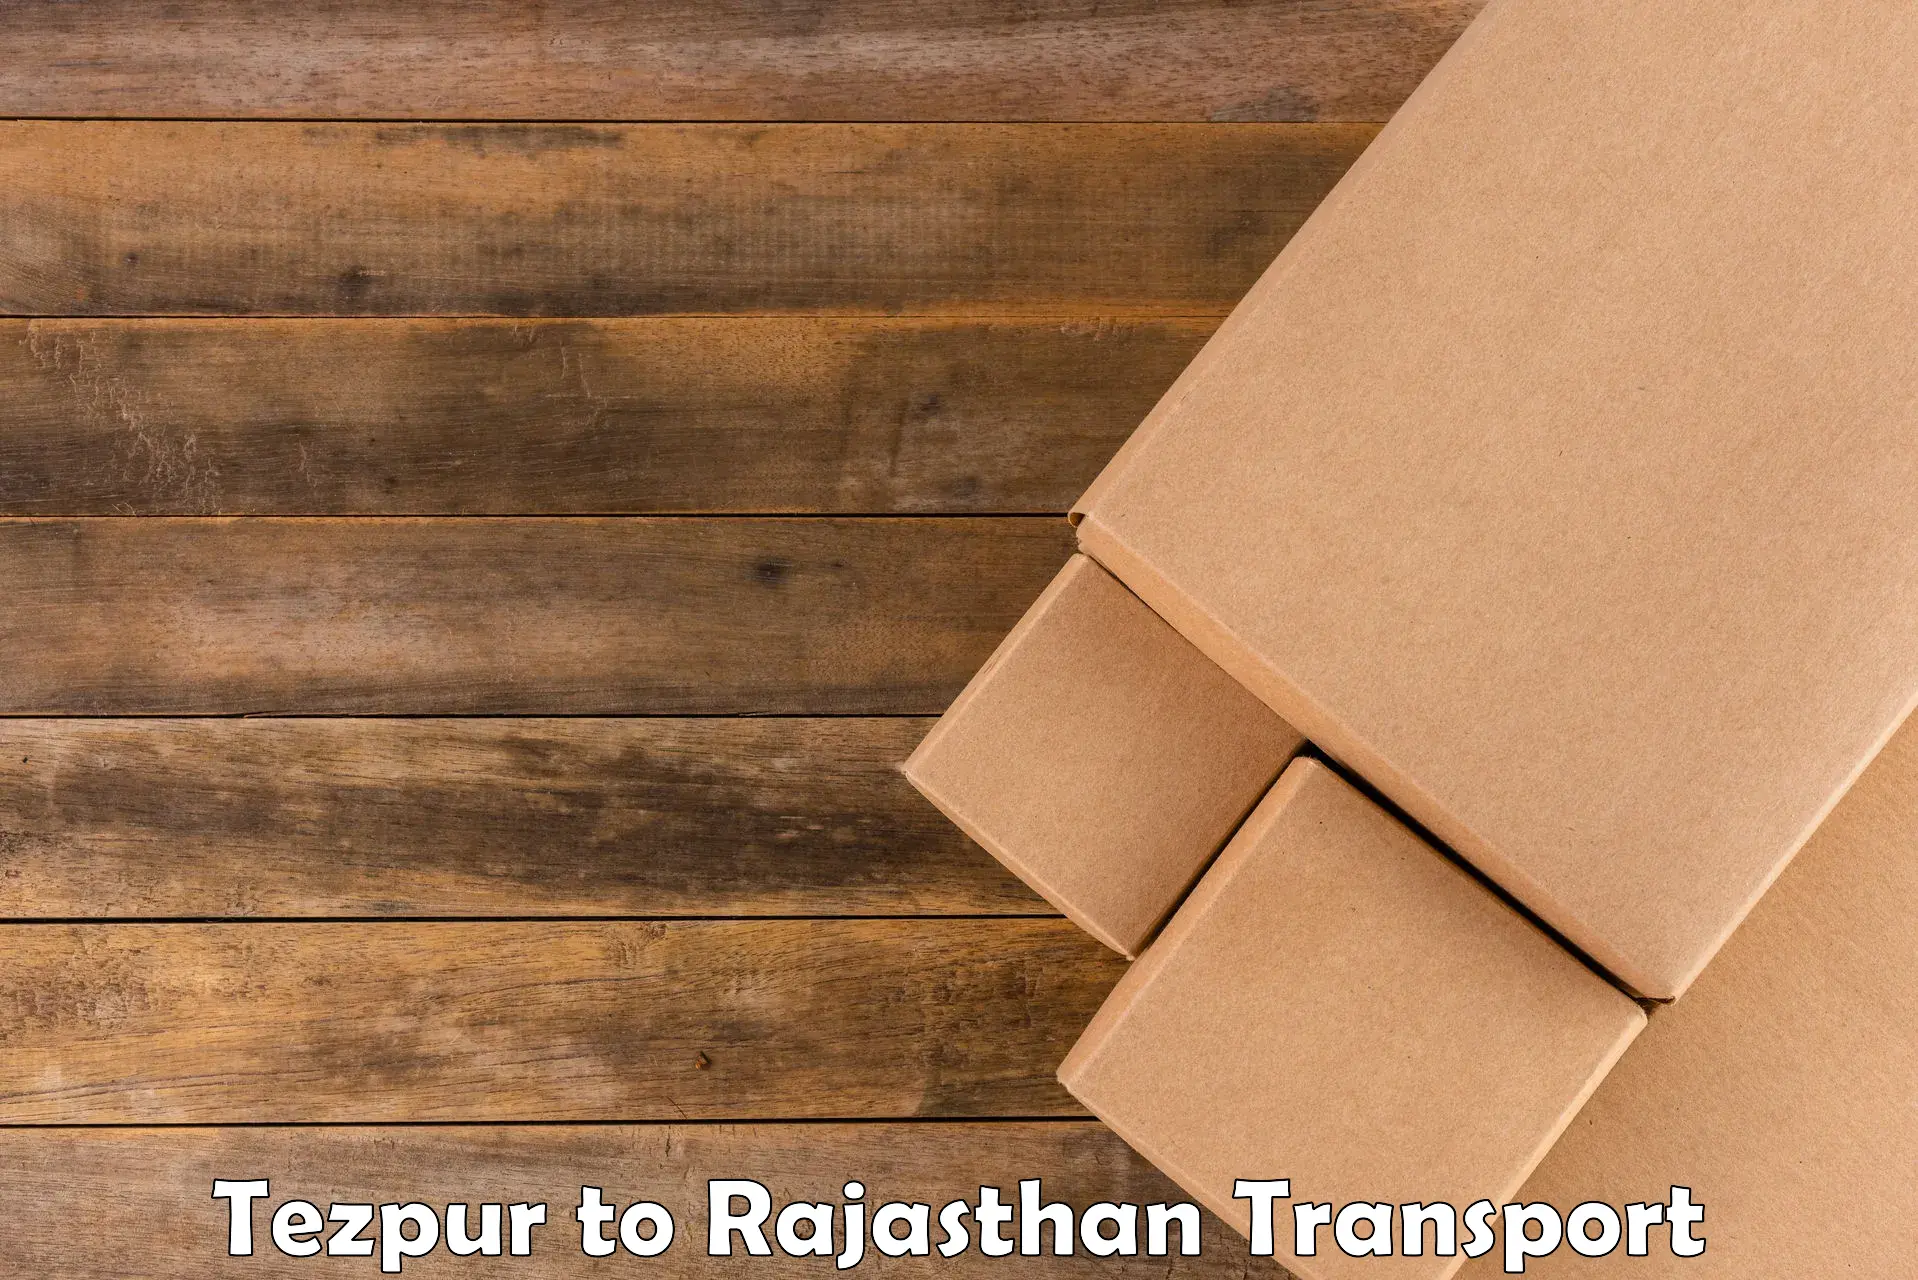 Air cargo transport services Tezpur to Nasirabad